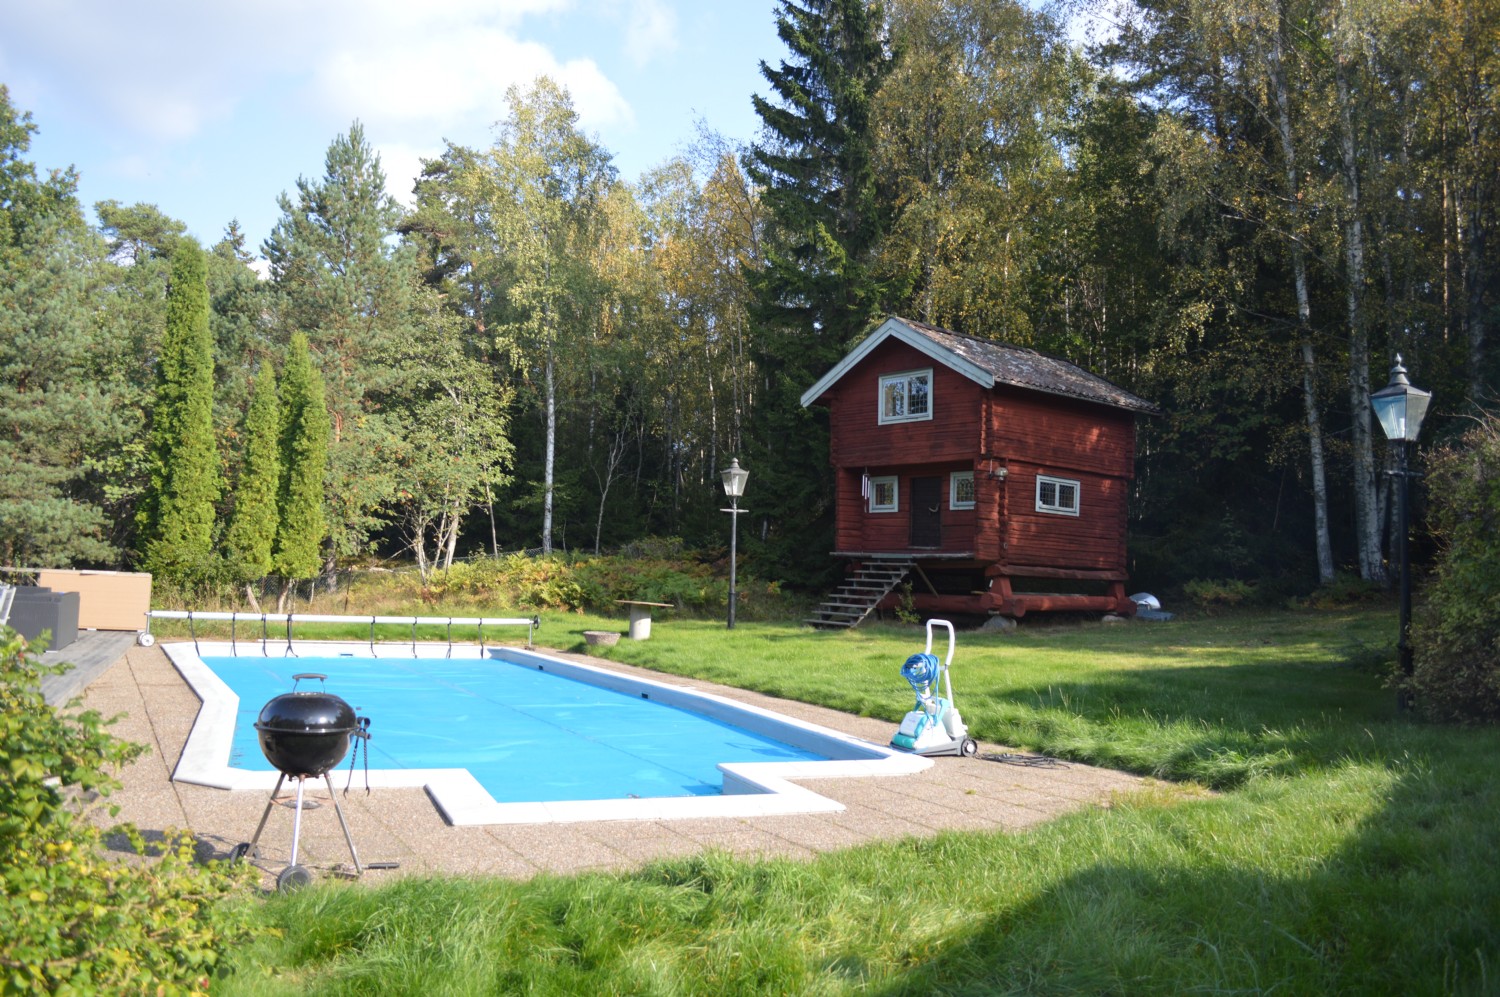 Poolen och hrbret/ Swimming pool and old grain house 